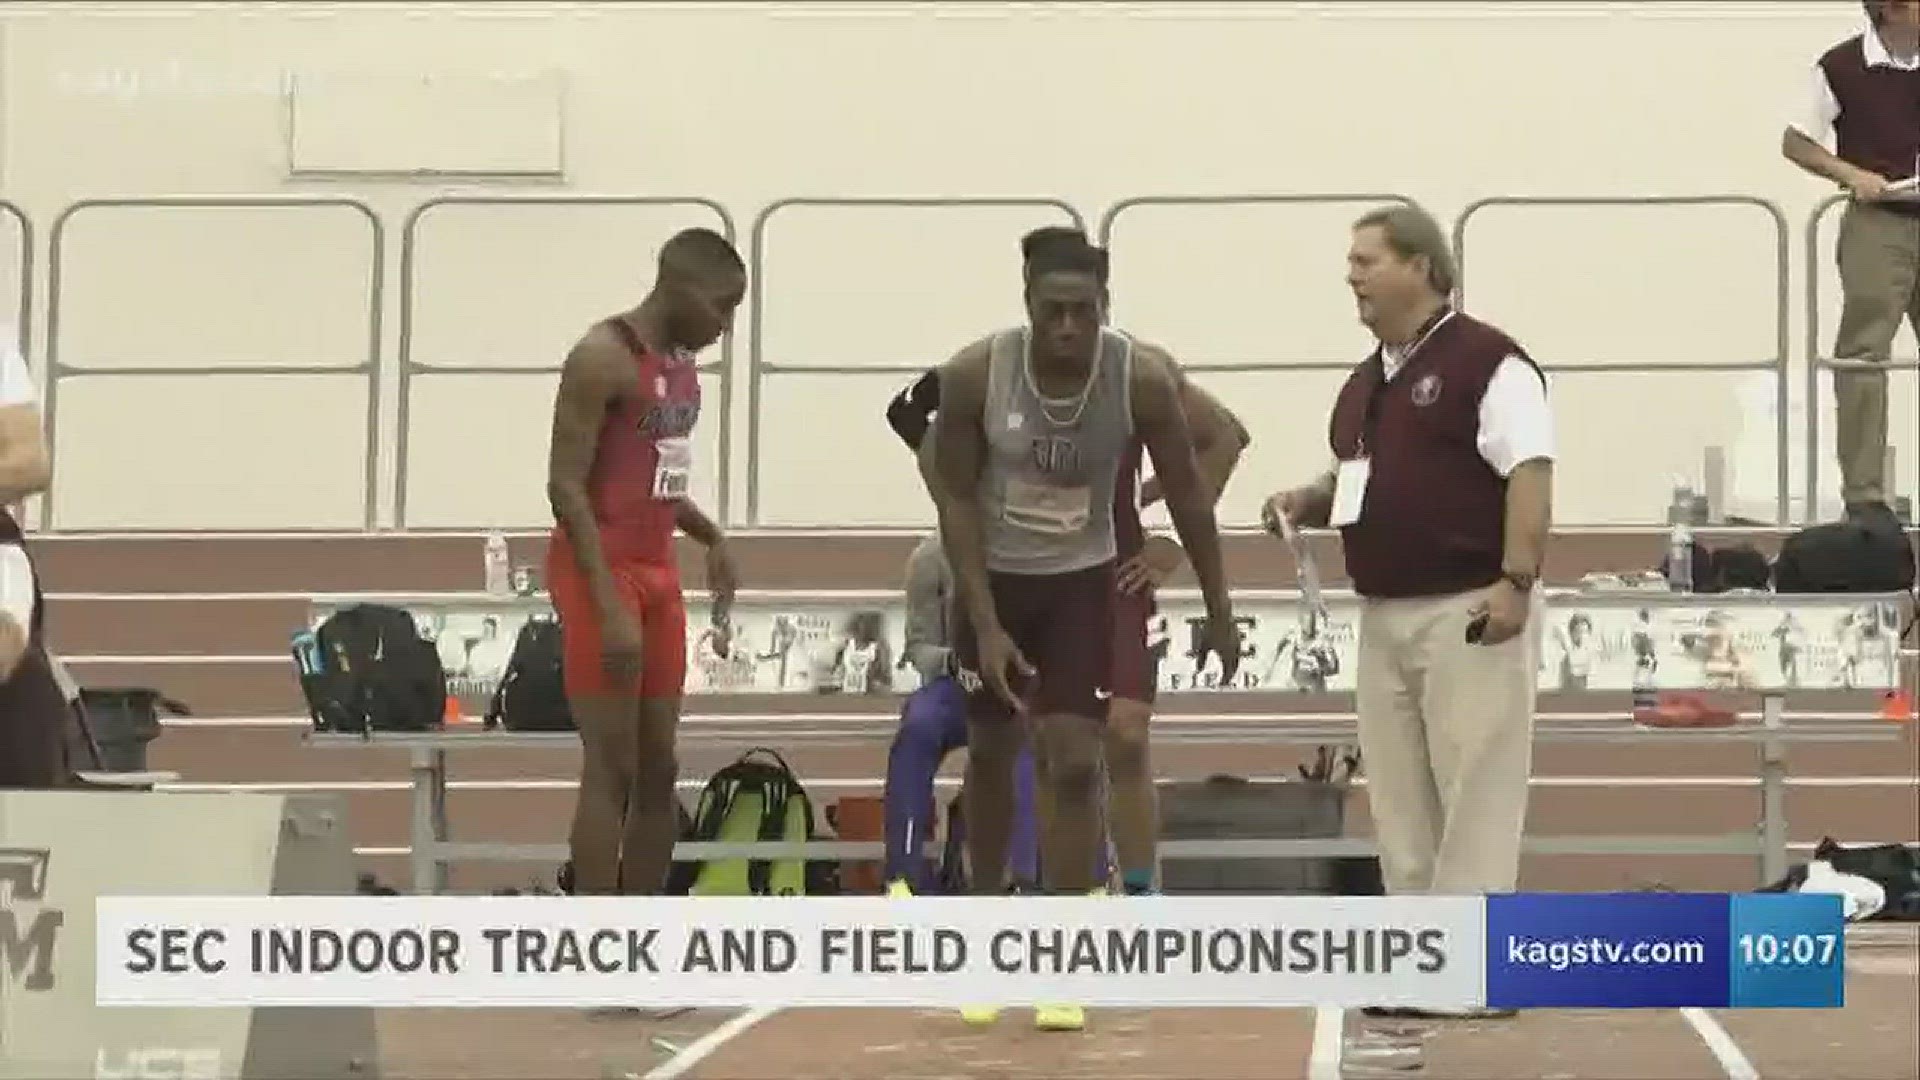 Texas A&M's men are 6th and the women 8th after one day of the SEC Indoor Track and Field Championships.